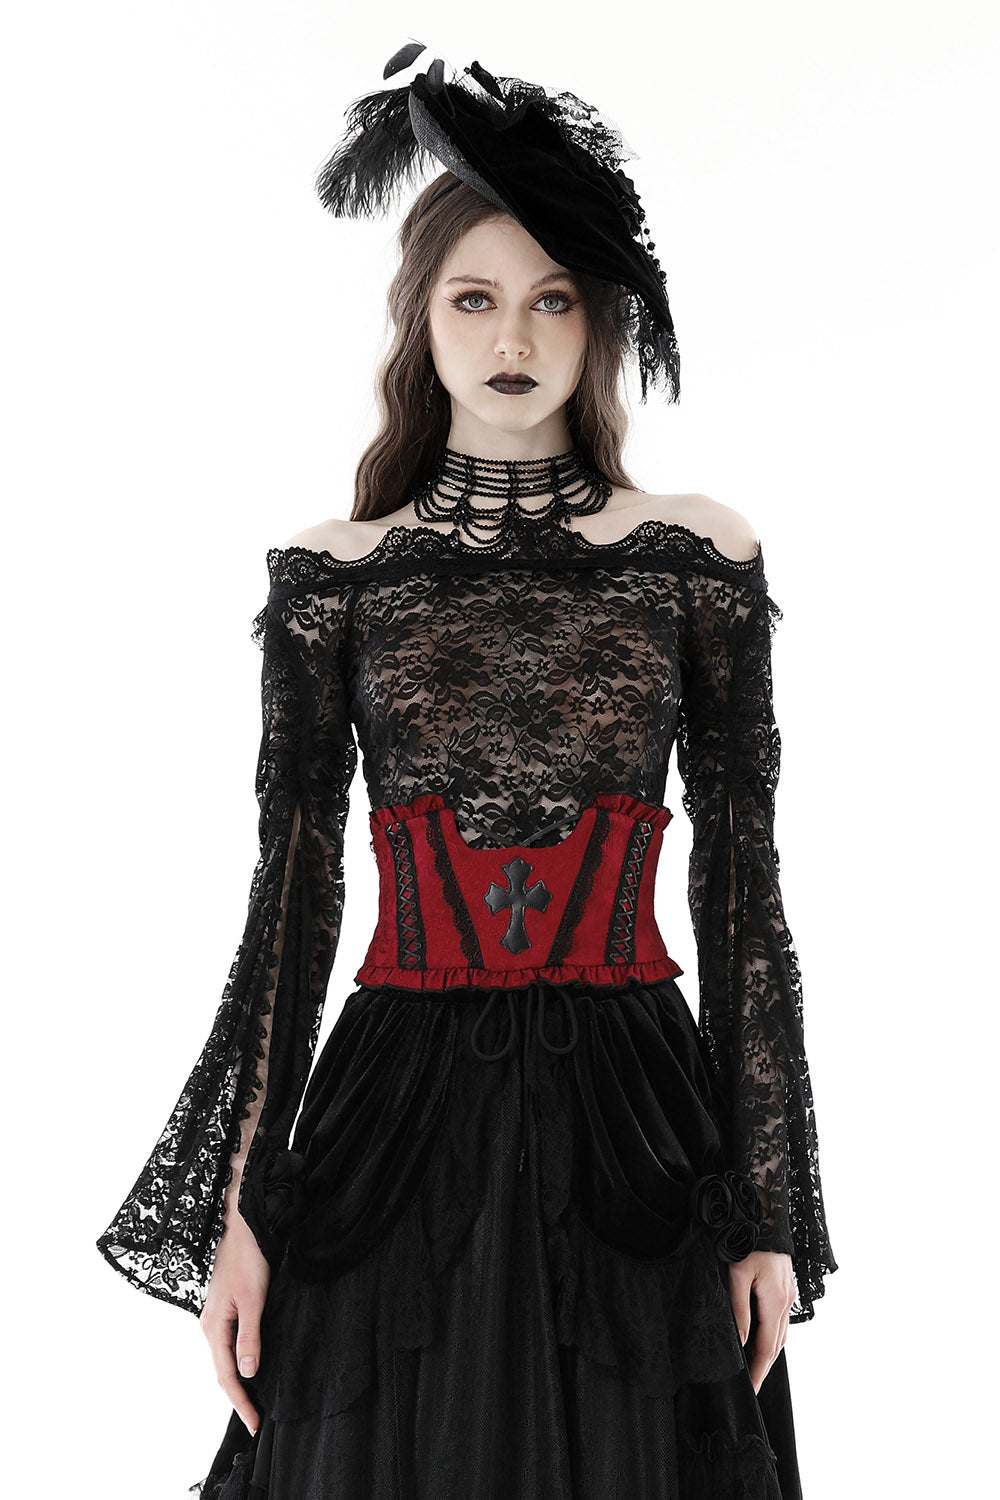 Killstar Fun Eral Doll Corset Lace Gothic Punk Witchy Occult Dress